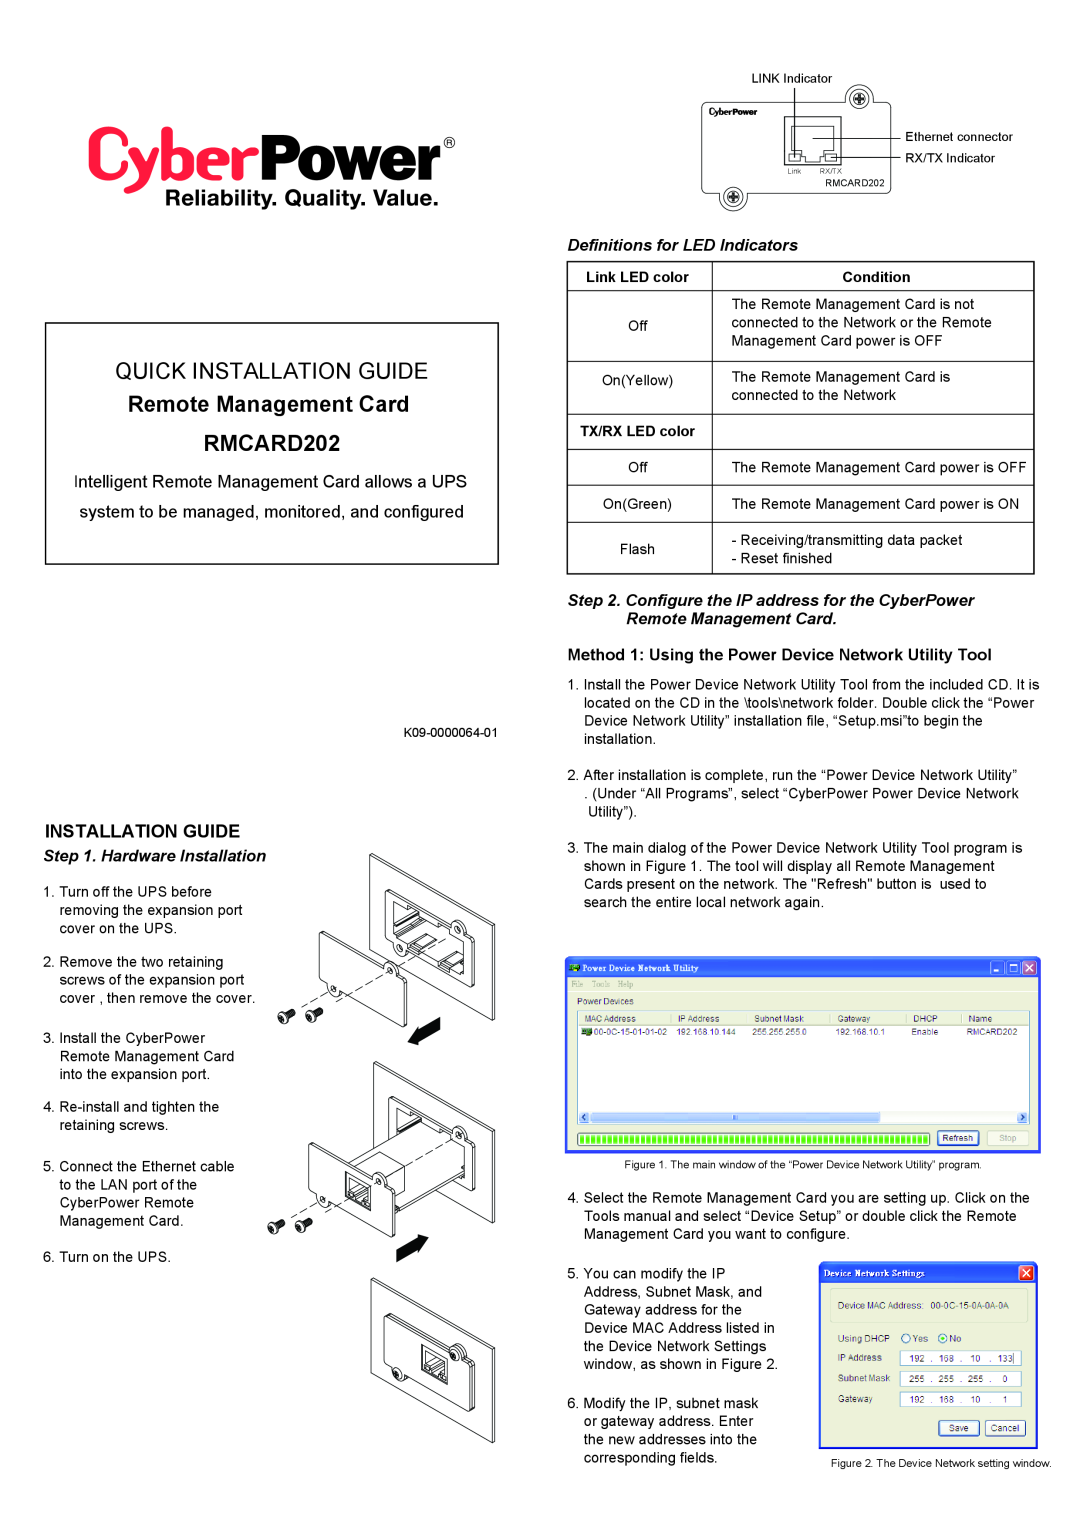 CyberPower RMCARD202 manual Installation Guide, Method 1 Using the Power Device Network Utility Tool, Link LED color 